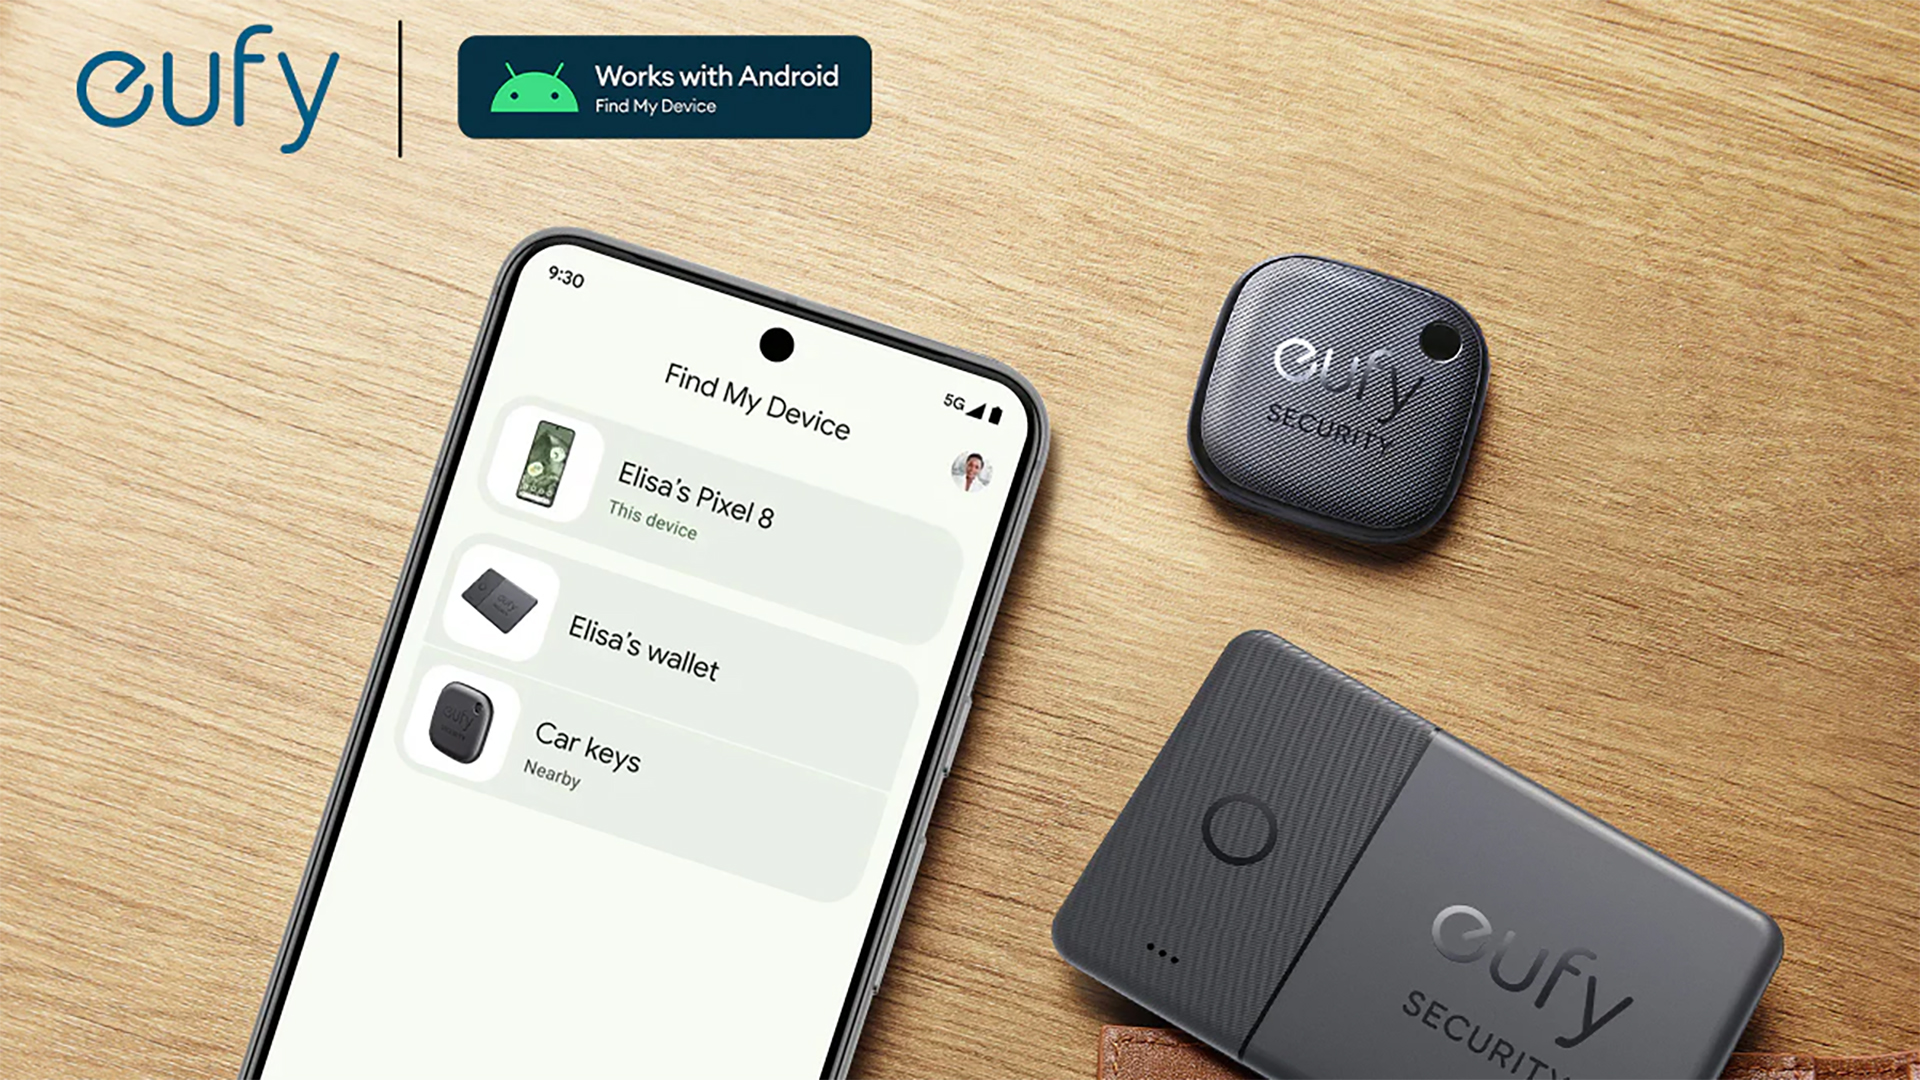 eufy will launch Find My Device network trackers in June